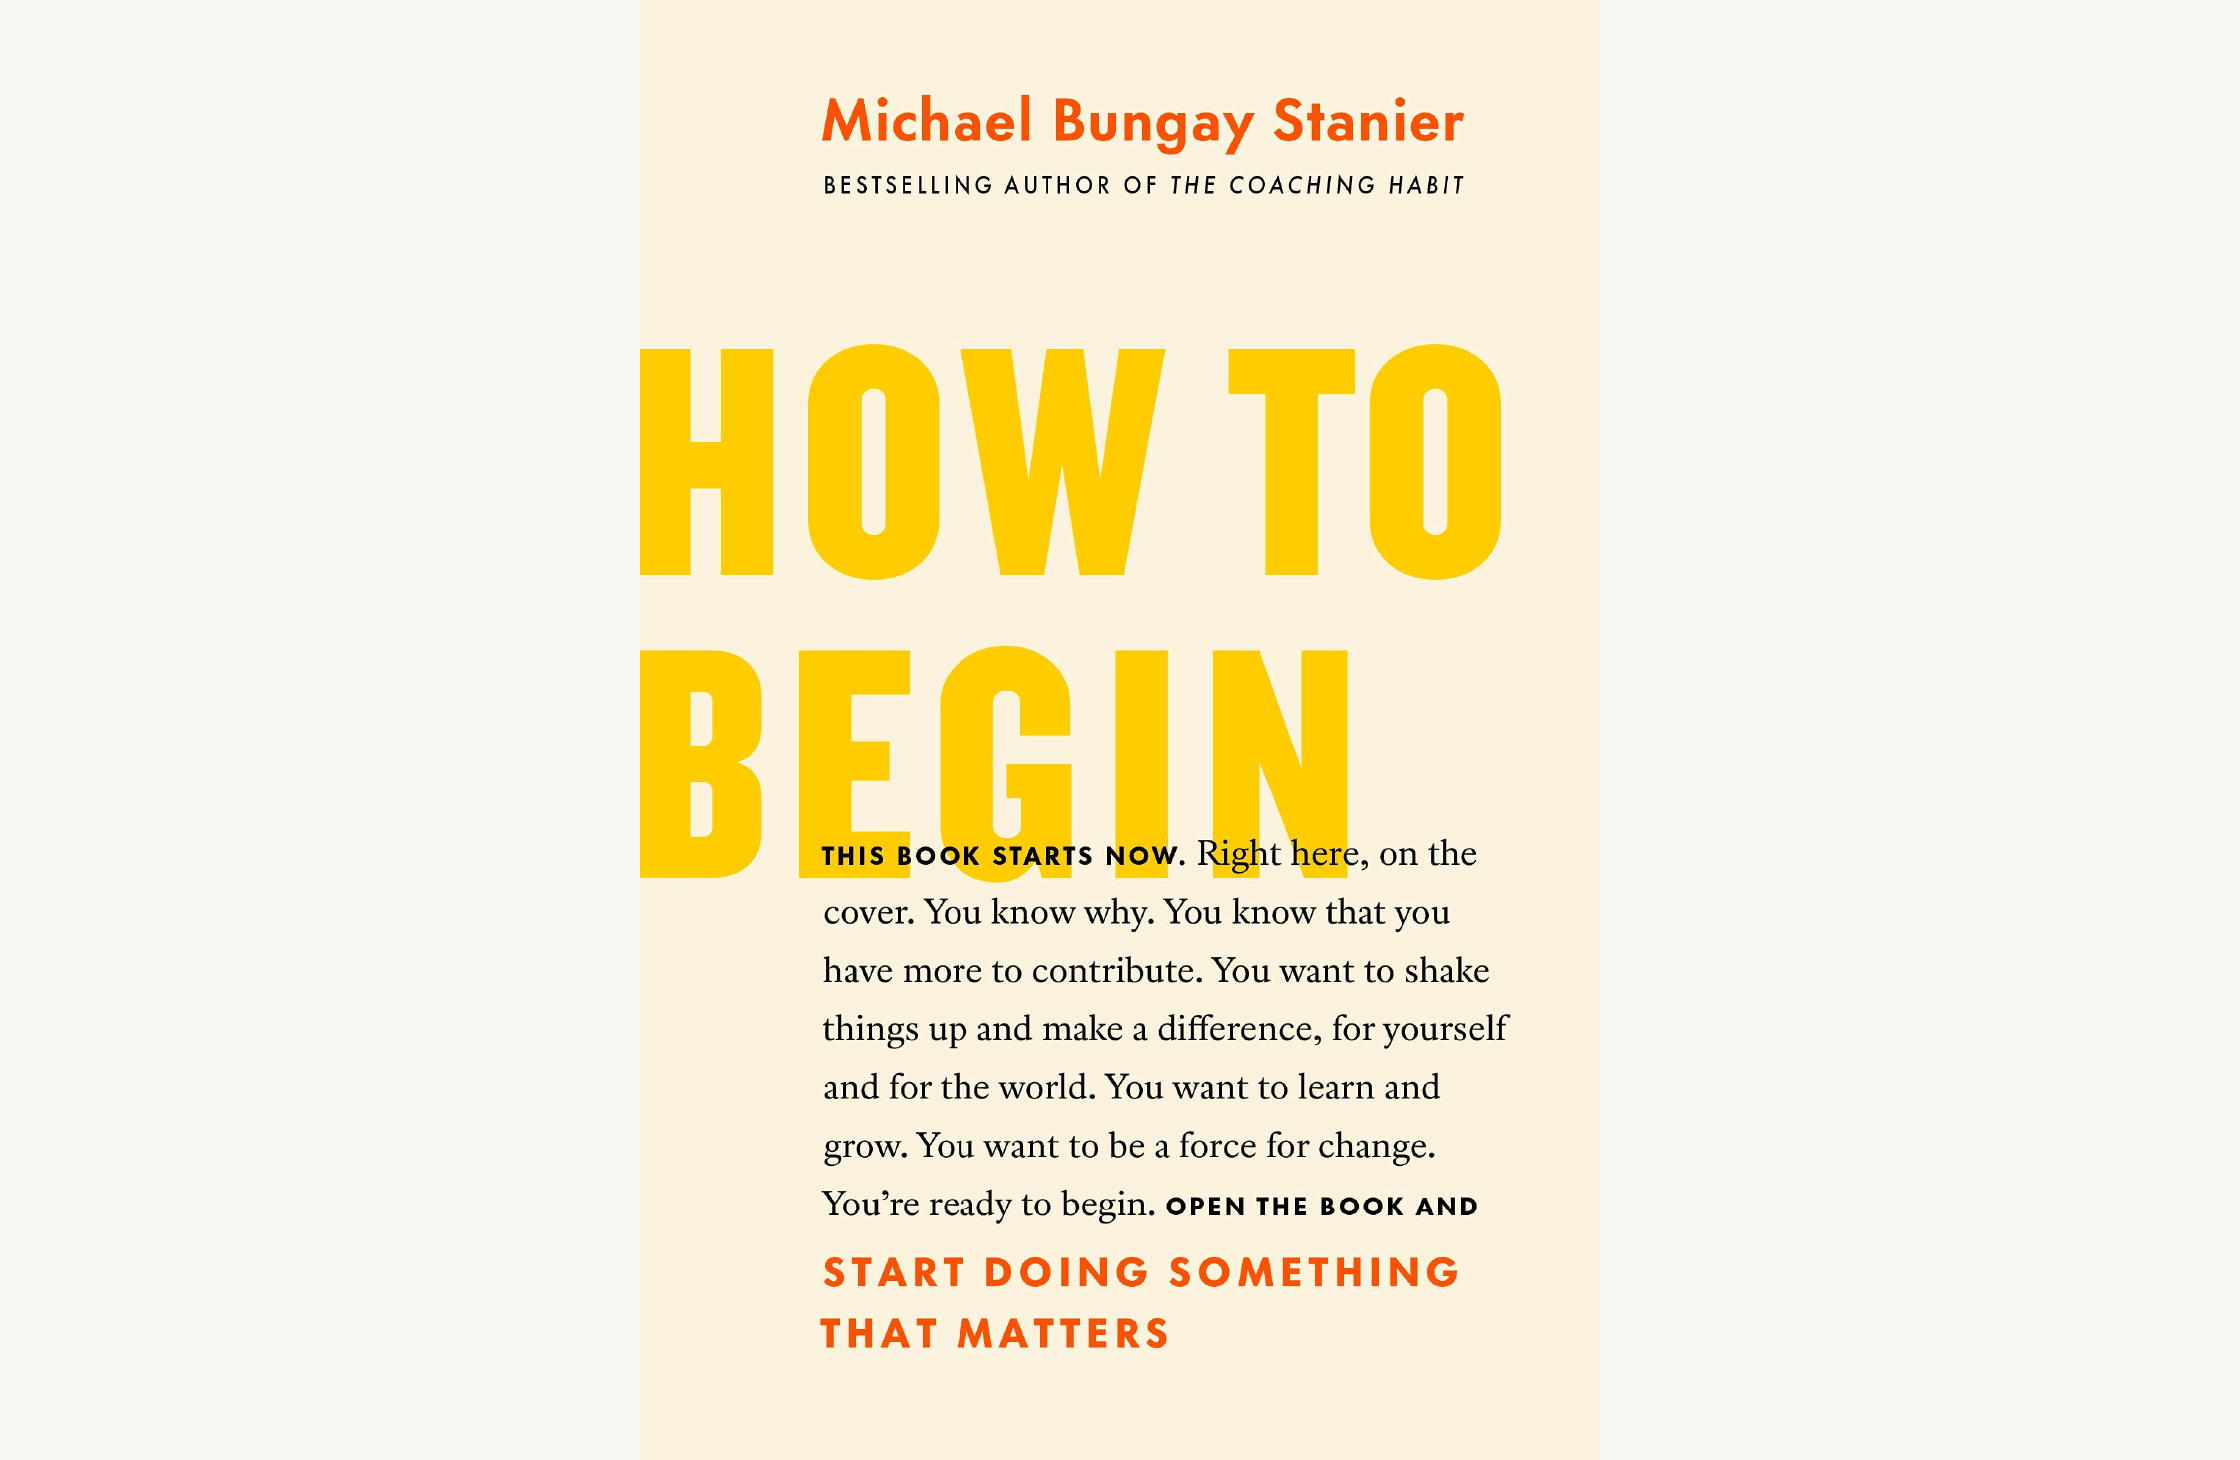 Summary: "How to Begin" by Michael Bungay-Stanier